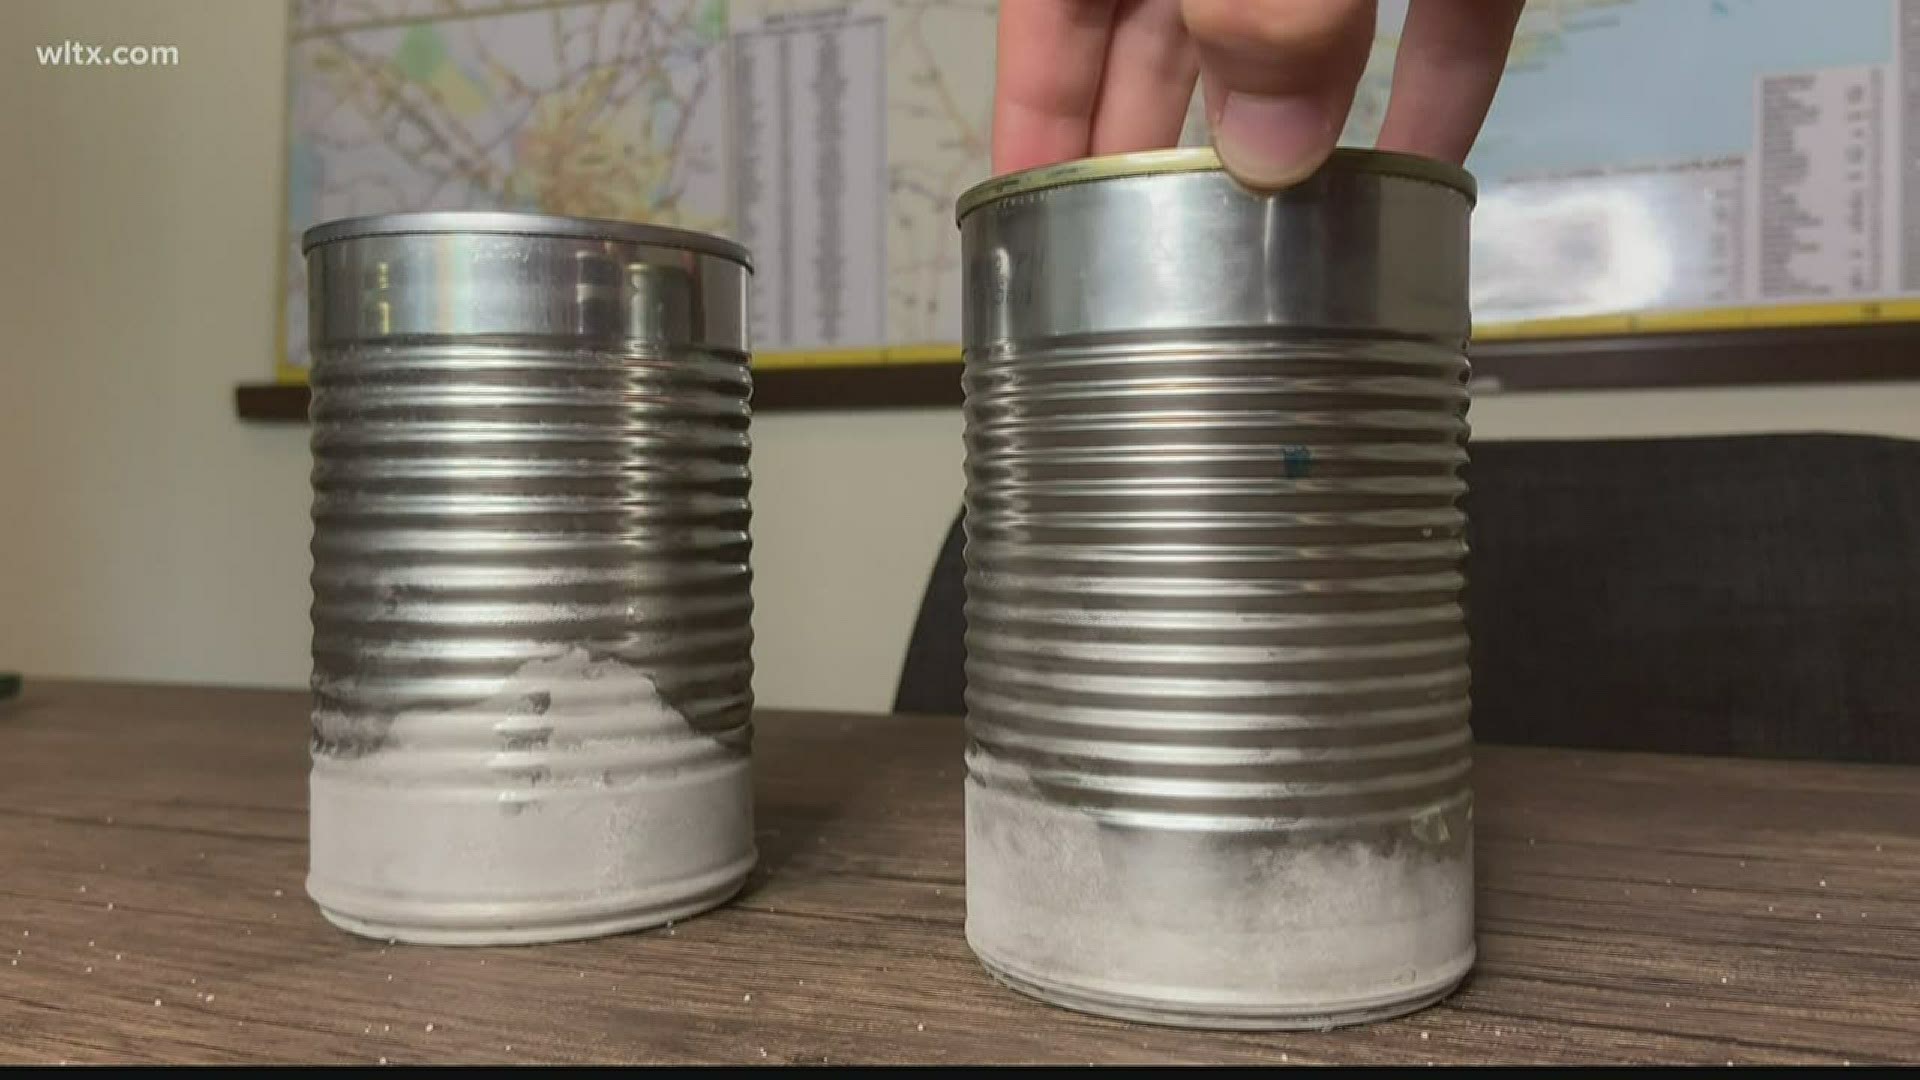 Meteorologist Danielle Miller explains the science behind frost and how to create it at home.